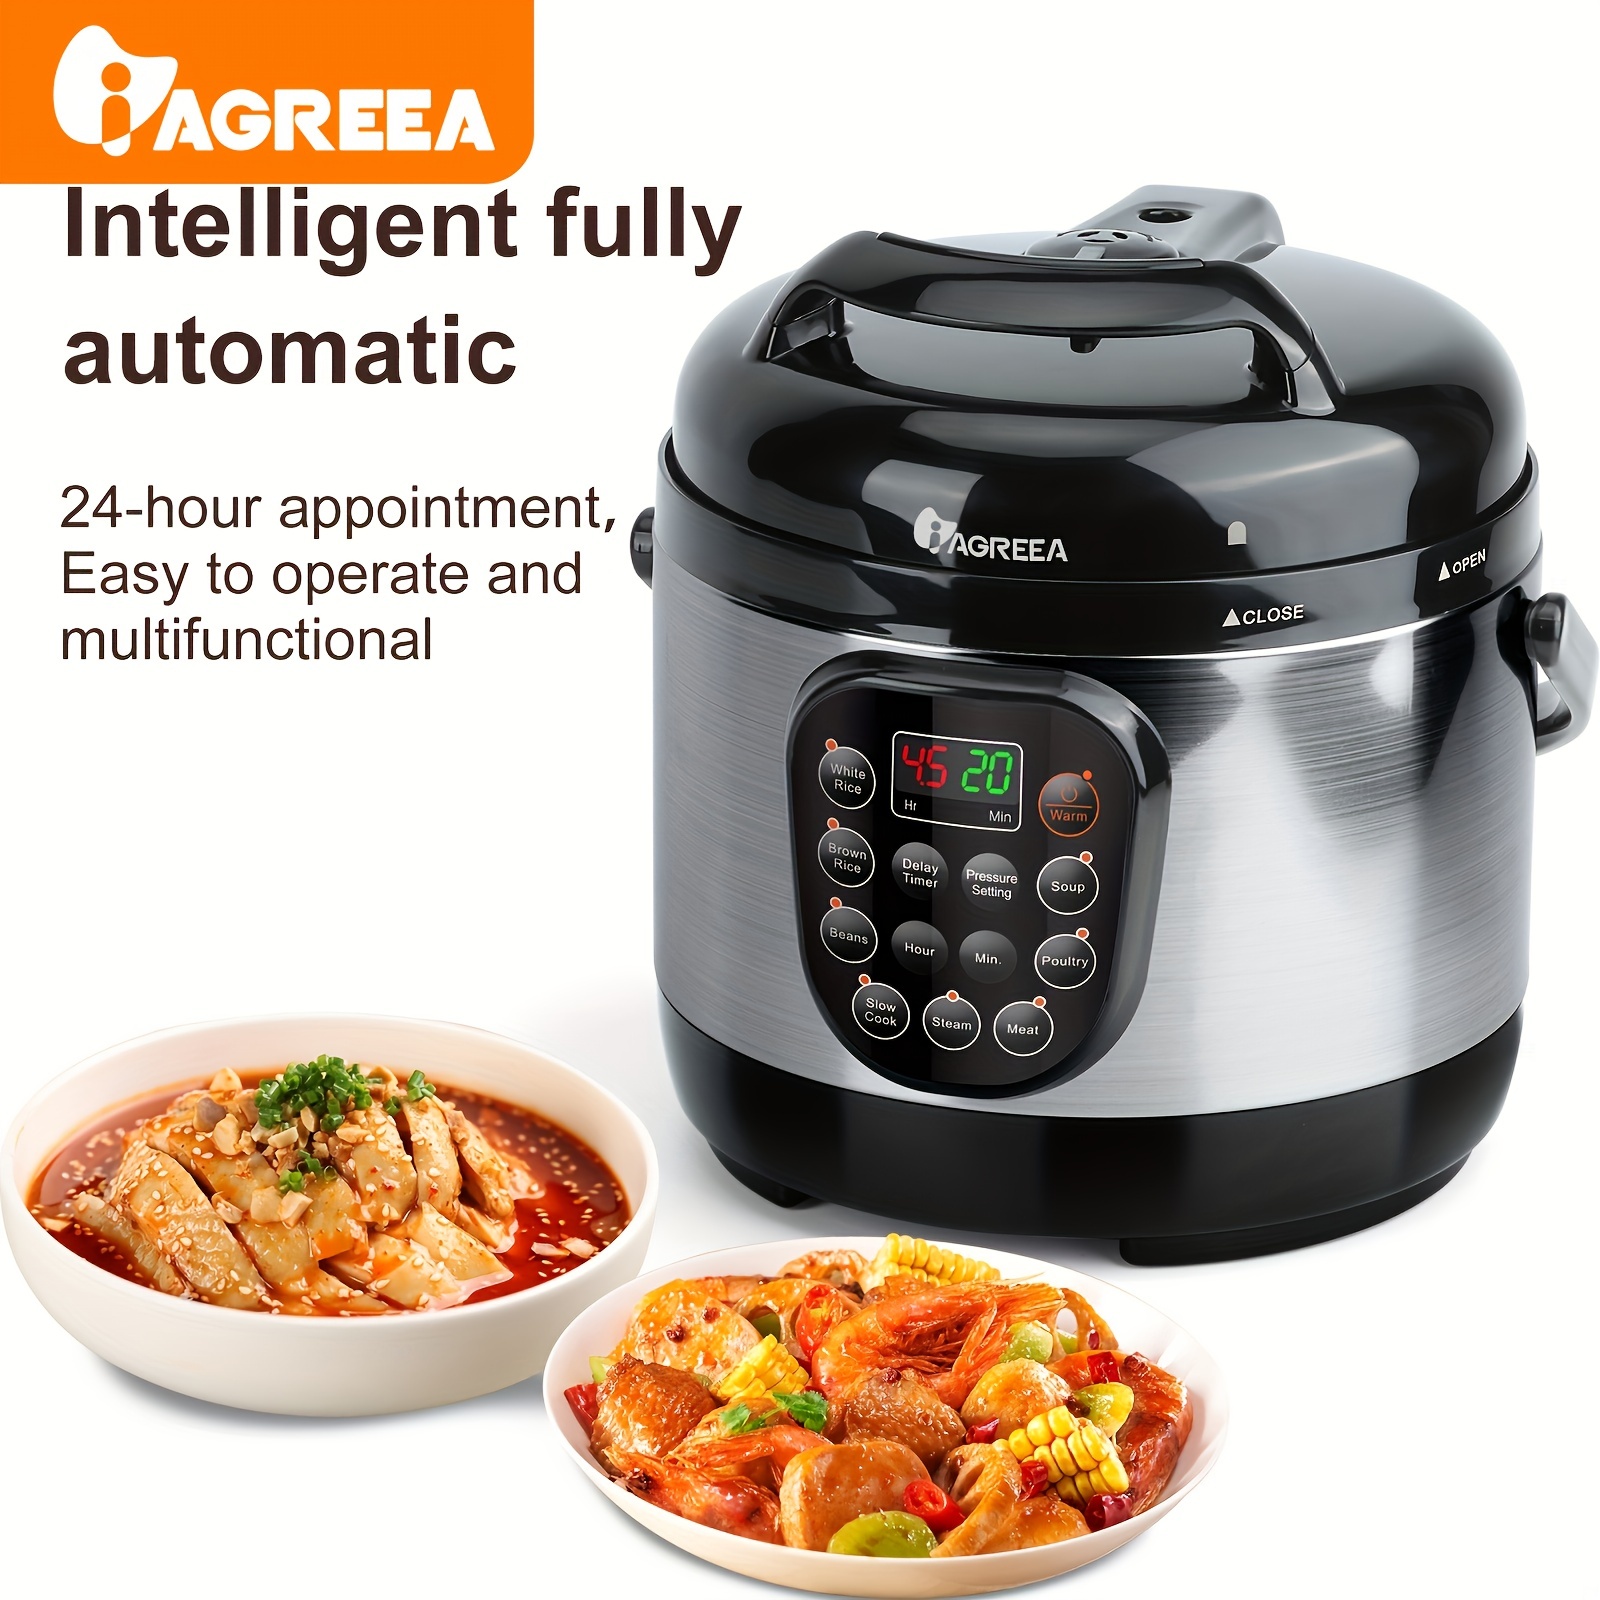 AROMA 4 cup uncooked Rice Cooker/Steamer, Digital, Cool-Touch